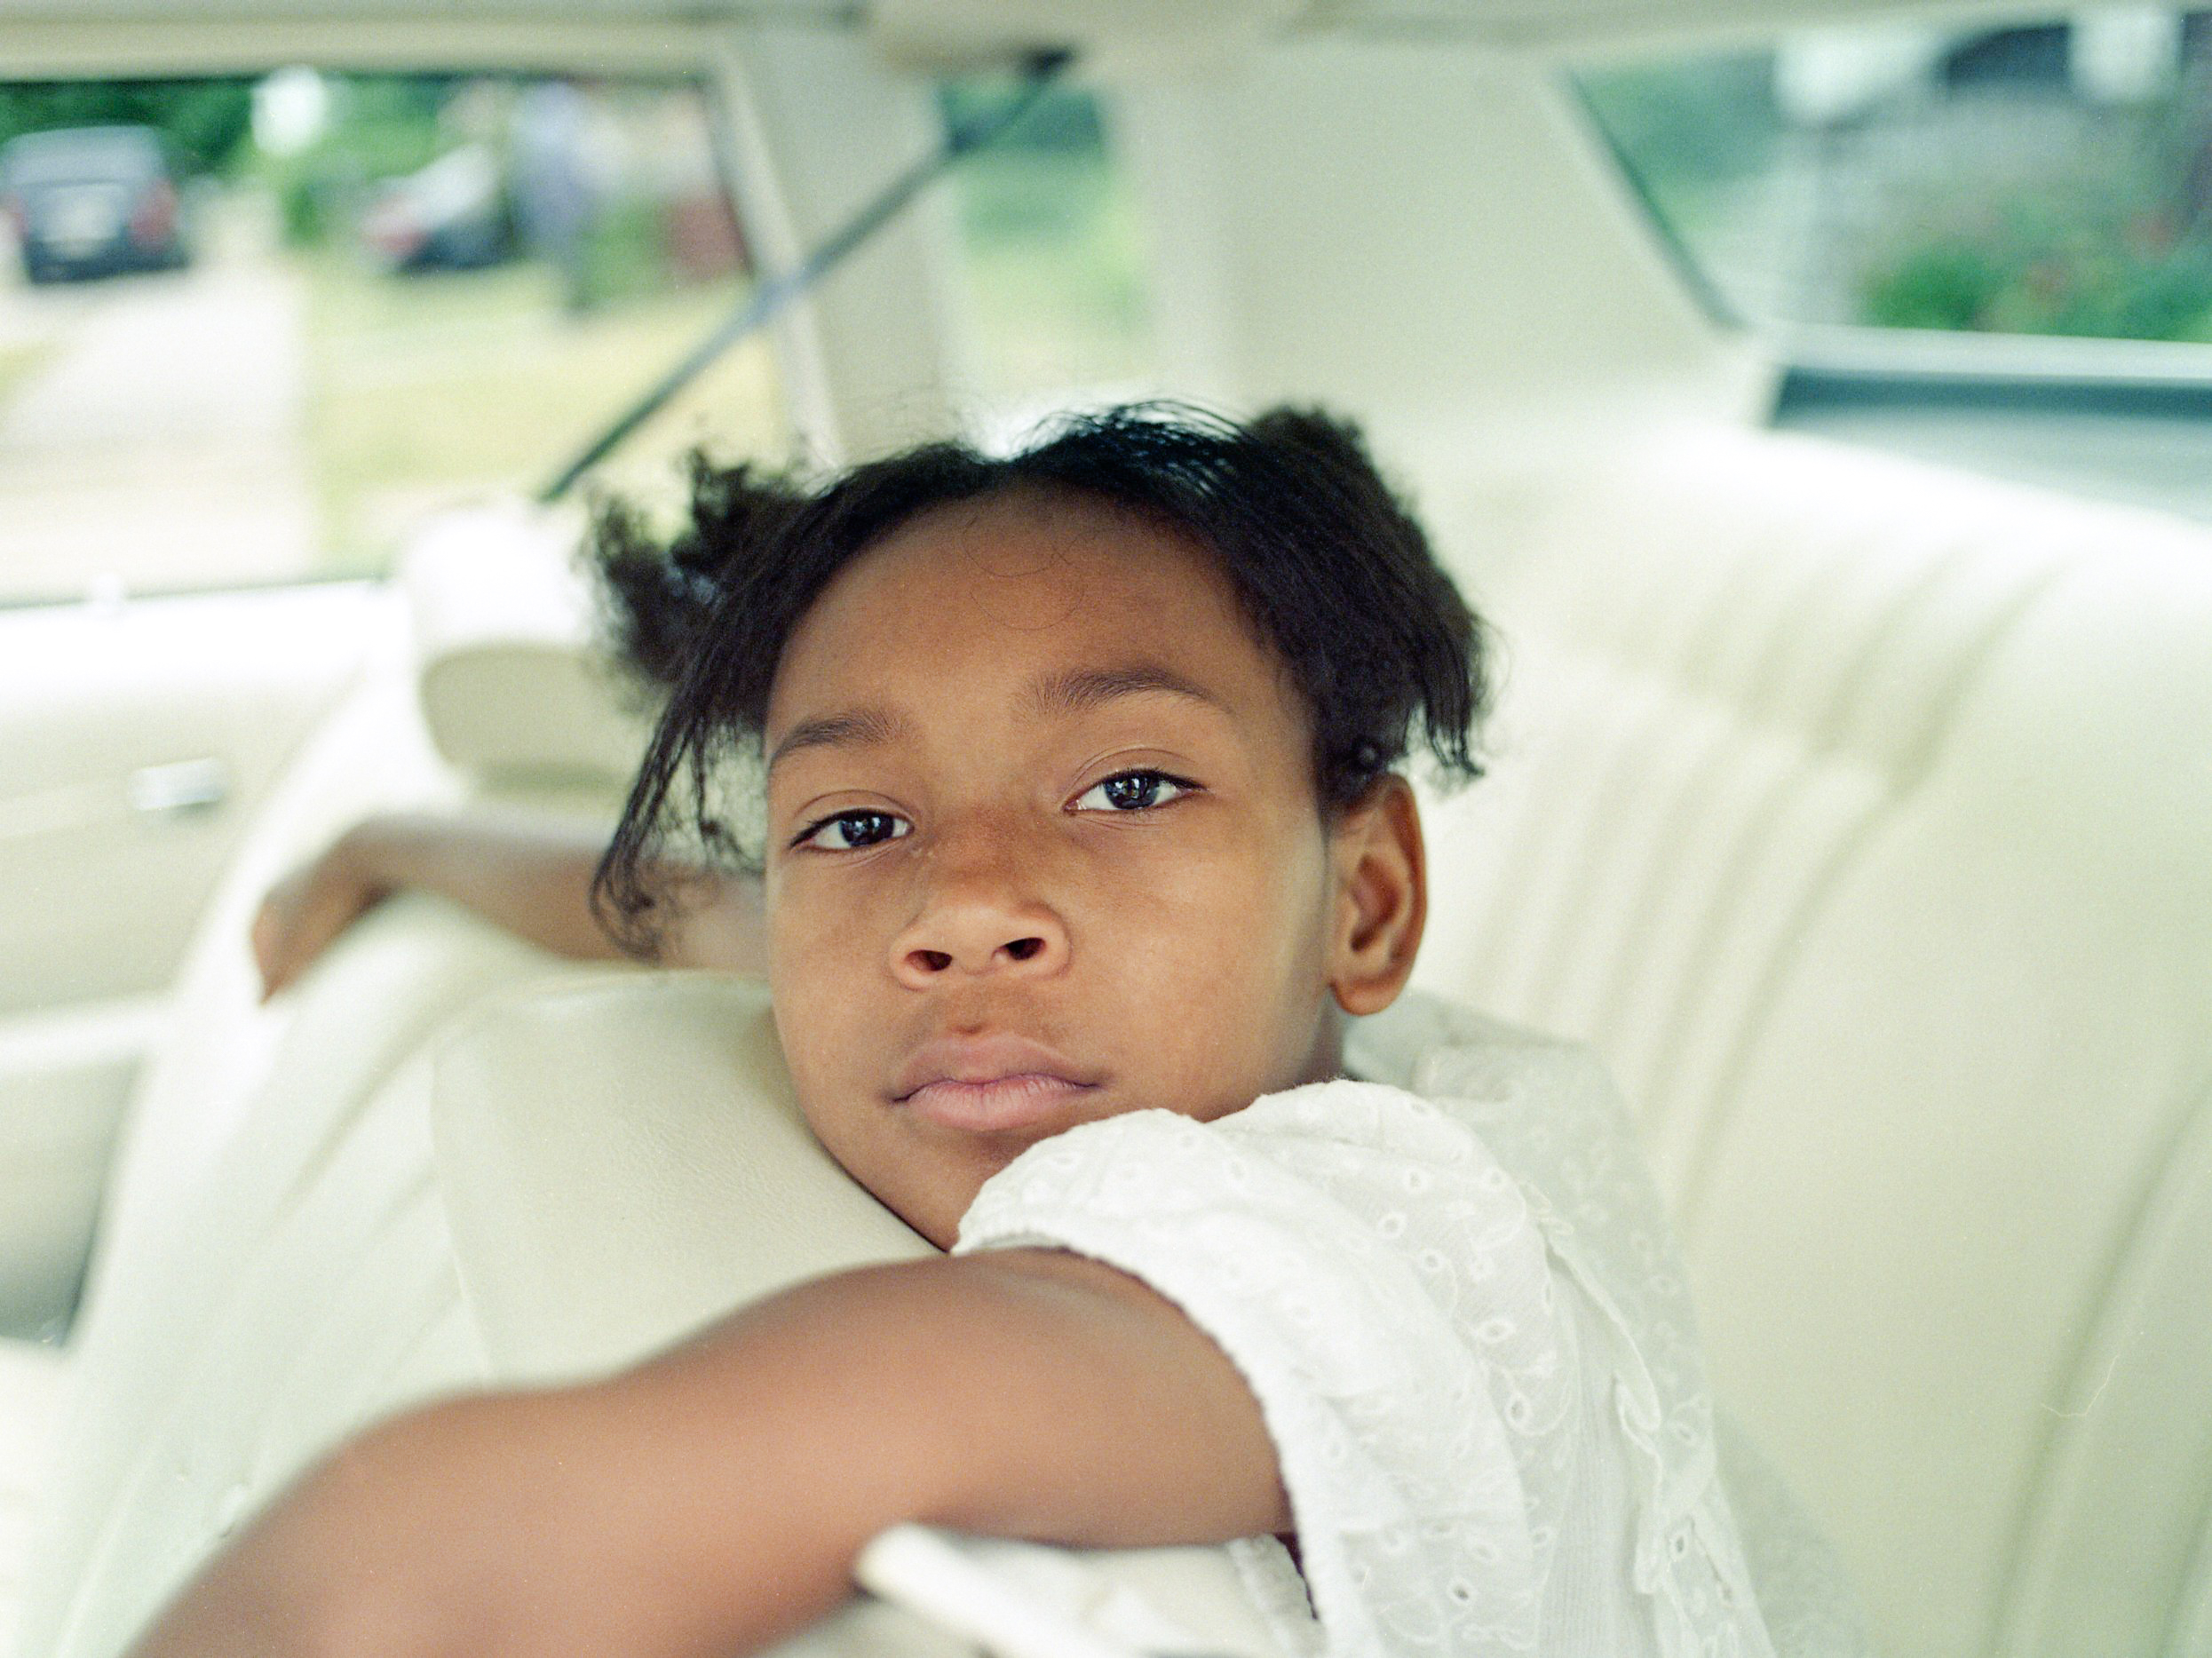 A brightly lit image of a young African American girl in a white dress is sitting in the back seat of a classic car with a white interior. Her arms are draped over the seat in front of her. She is looking directly at the camera with a firm gaze.